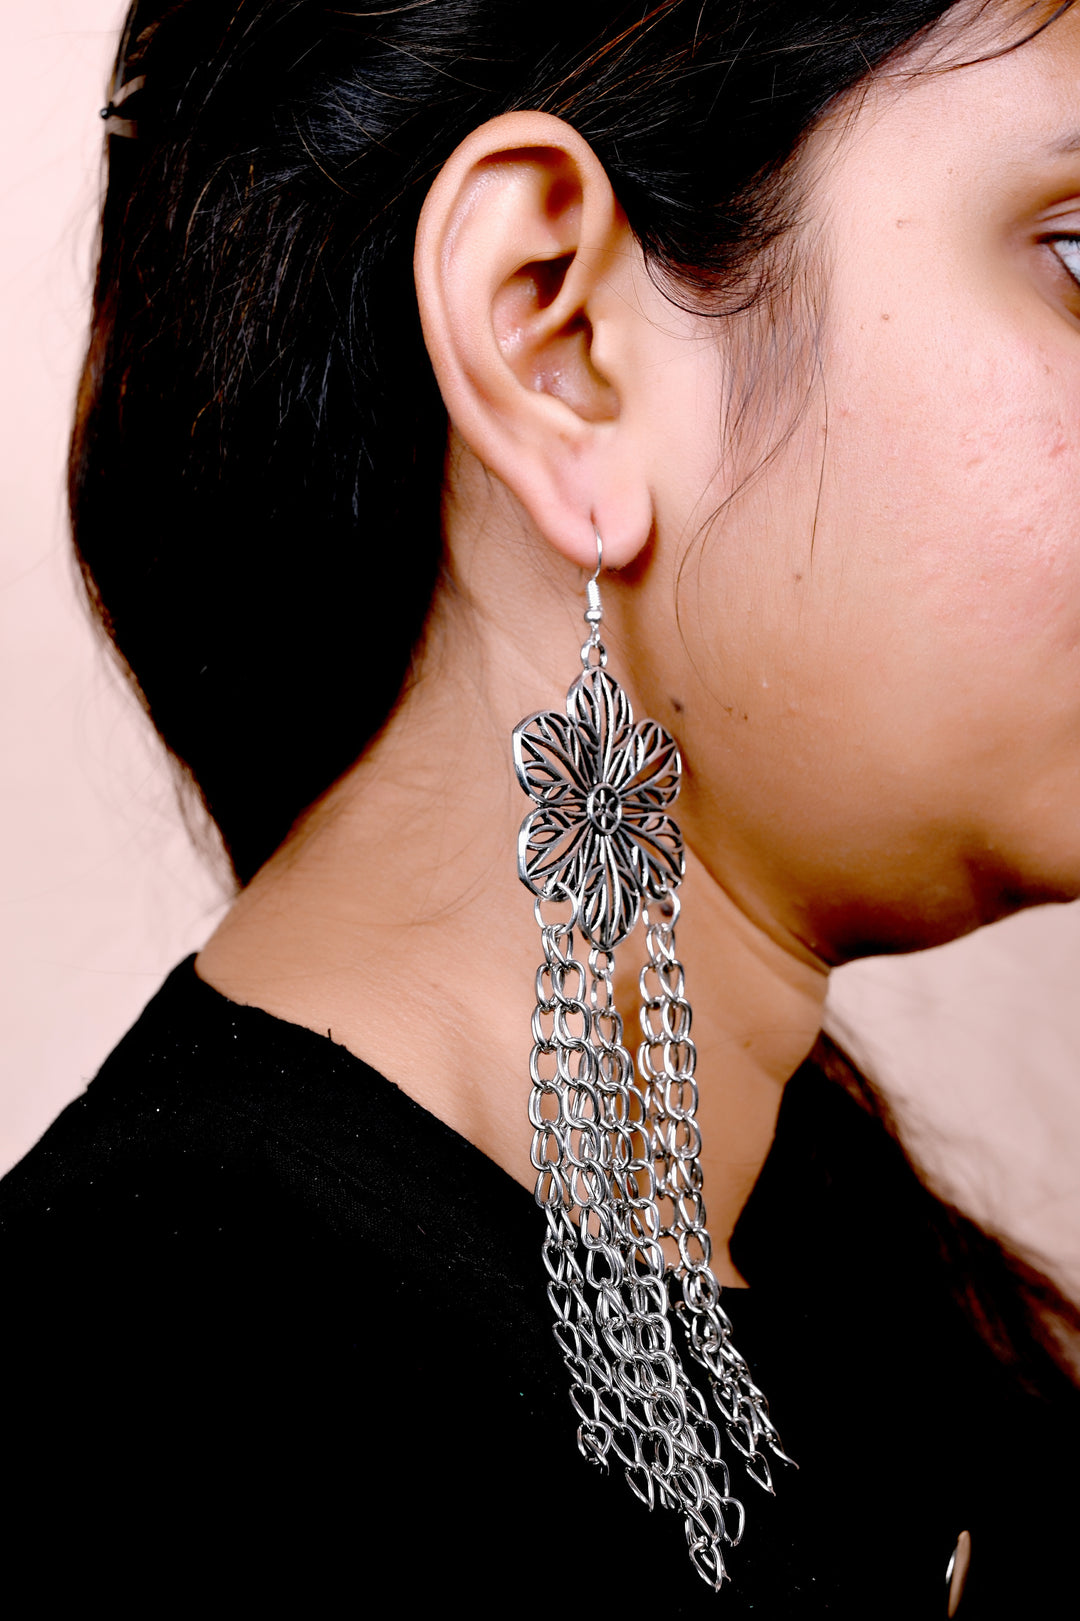 Stunning Flower Shaped Metal Big Charm Earring Styled With Multi Layered Metal Chain Hanging At The Bottom